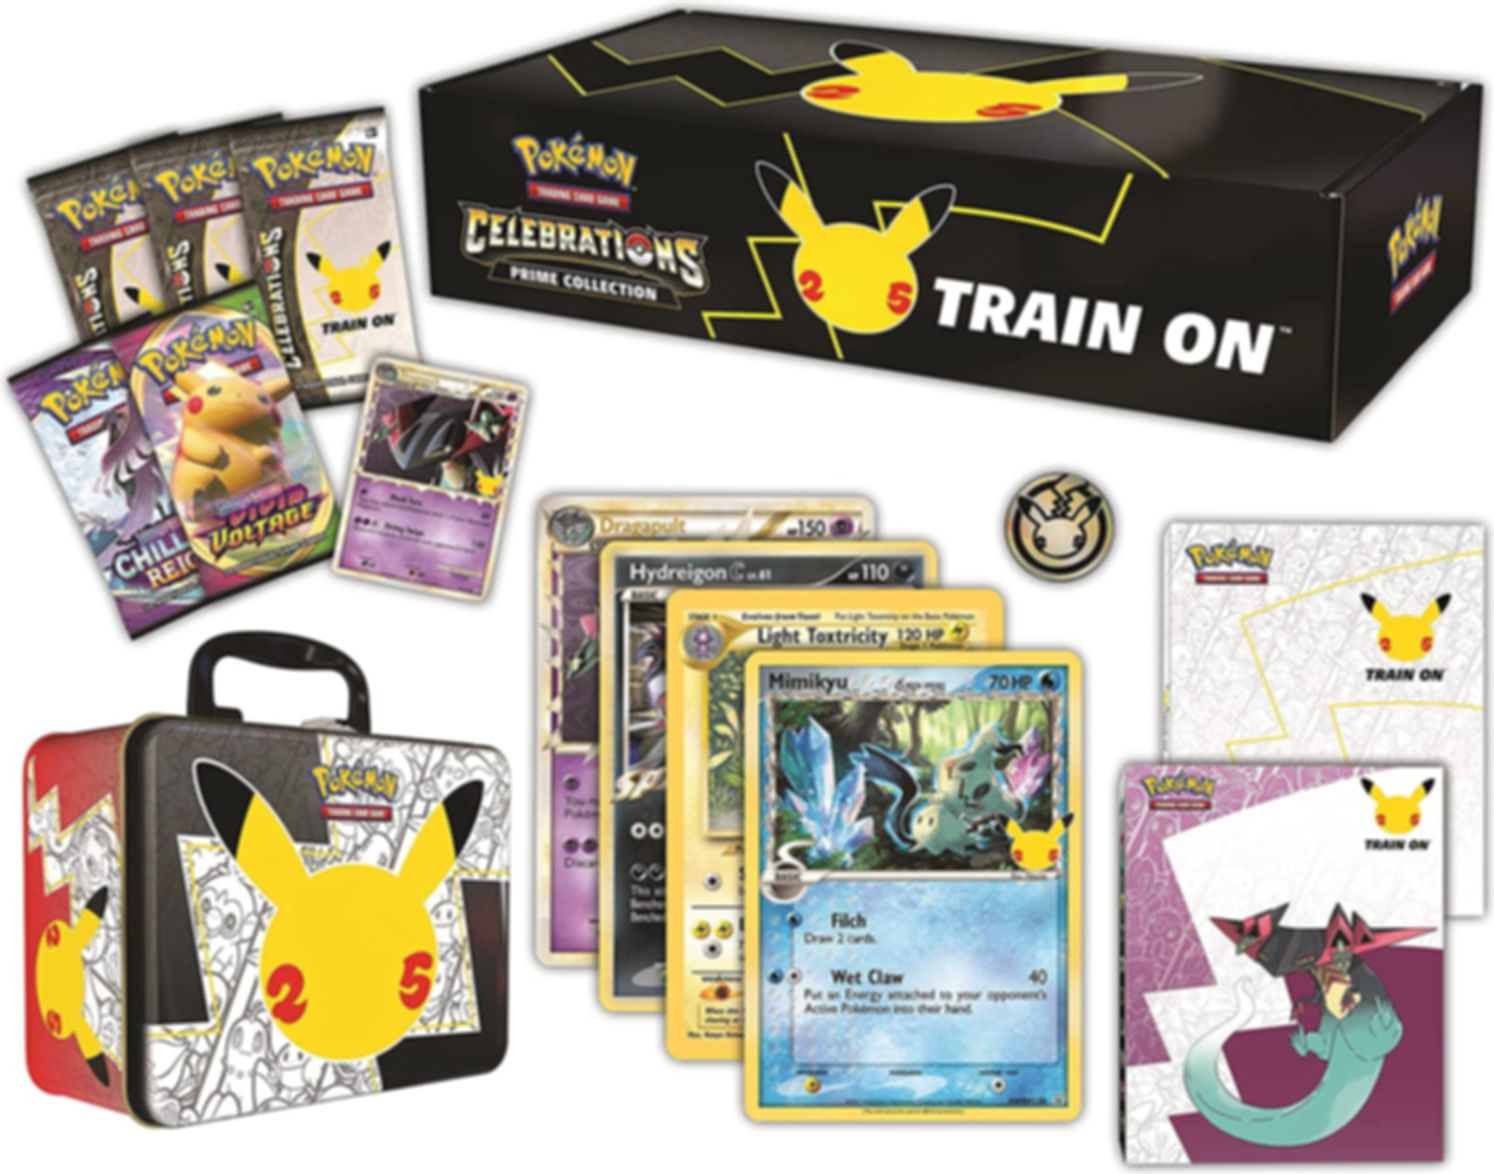 The best prices today for Pokémon Celebrations Prime Collection ...